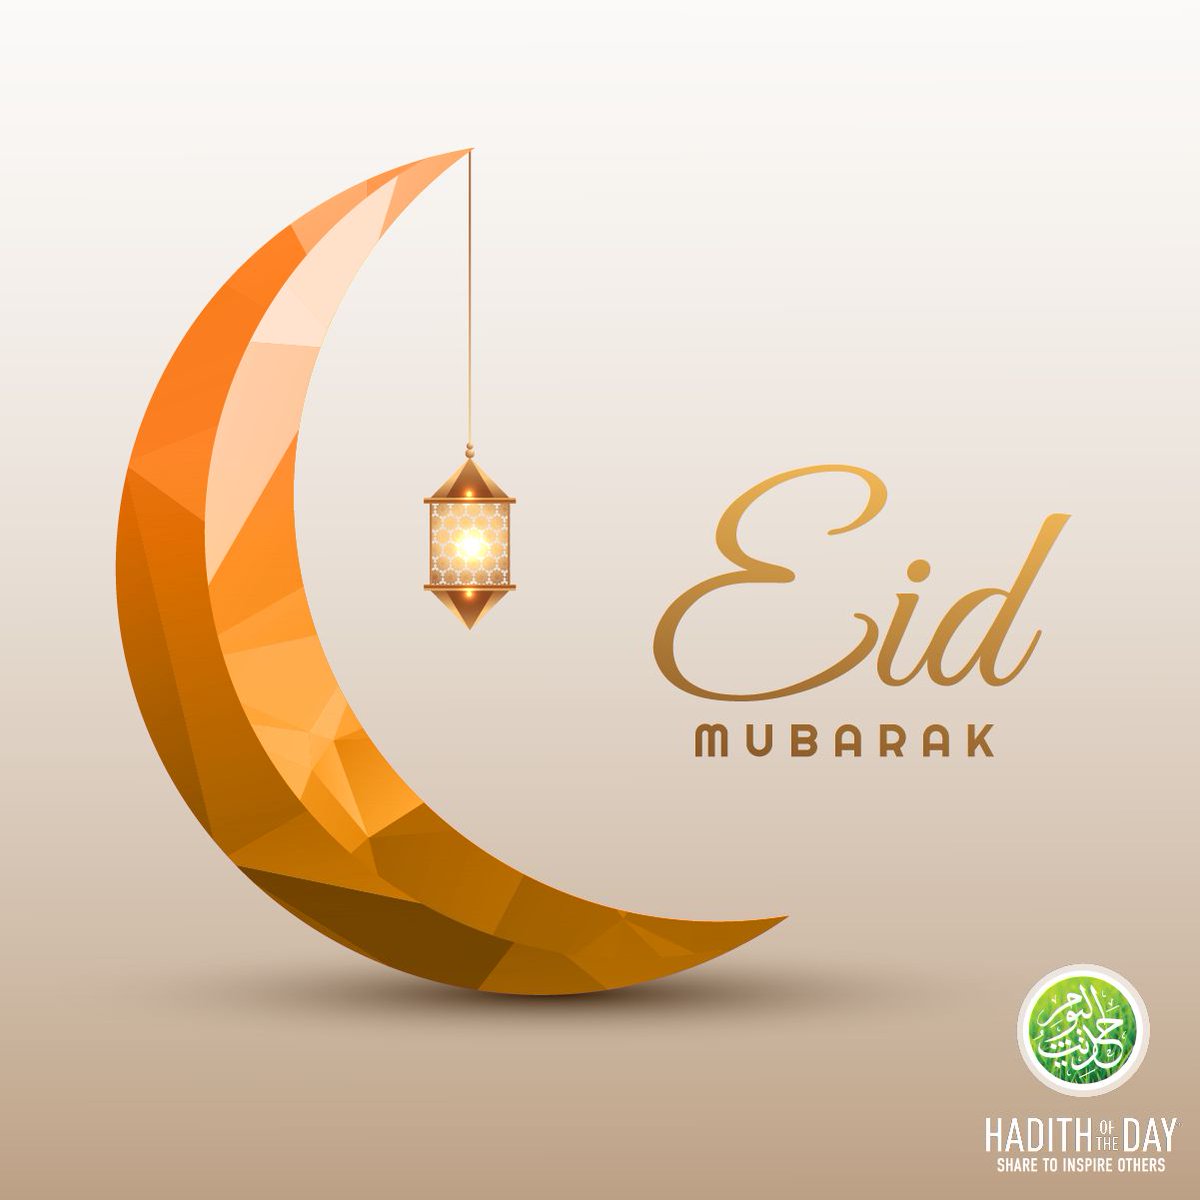 Eid Mubarak from our family to yours. Thank you for being with us every day this Ramadan and we hope you enjoyed our content. May Allah bless you today, tomorrow and always - Ameen!